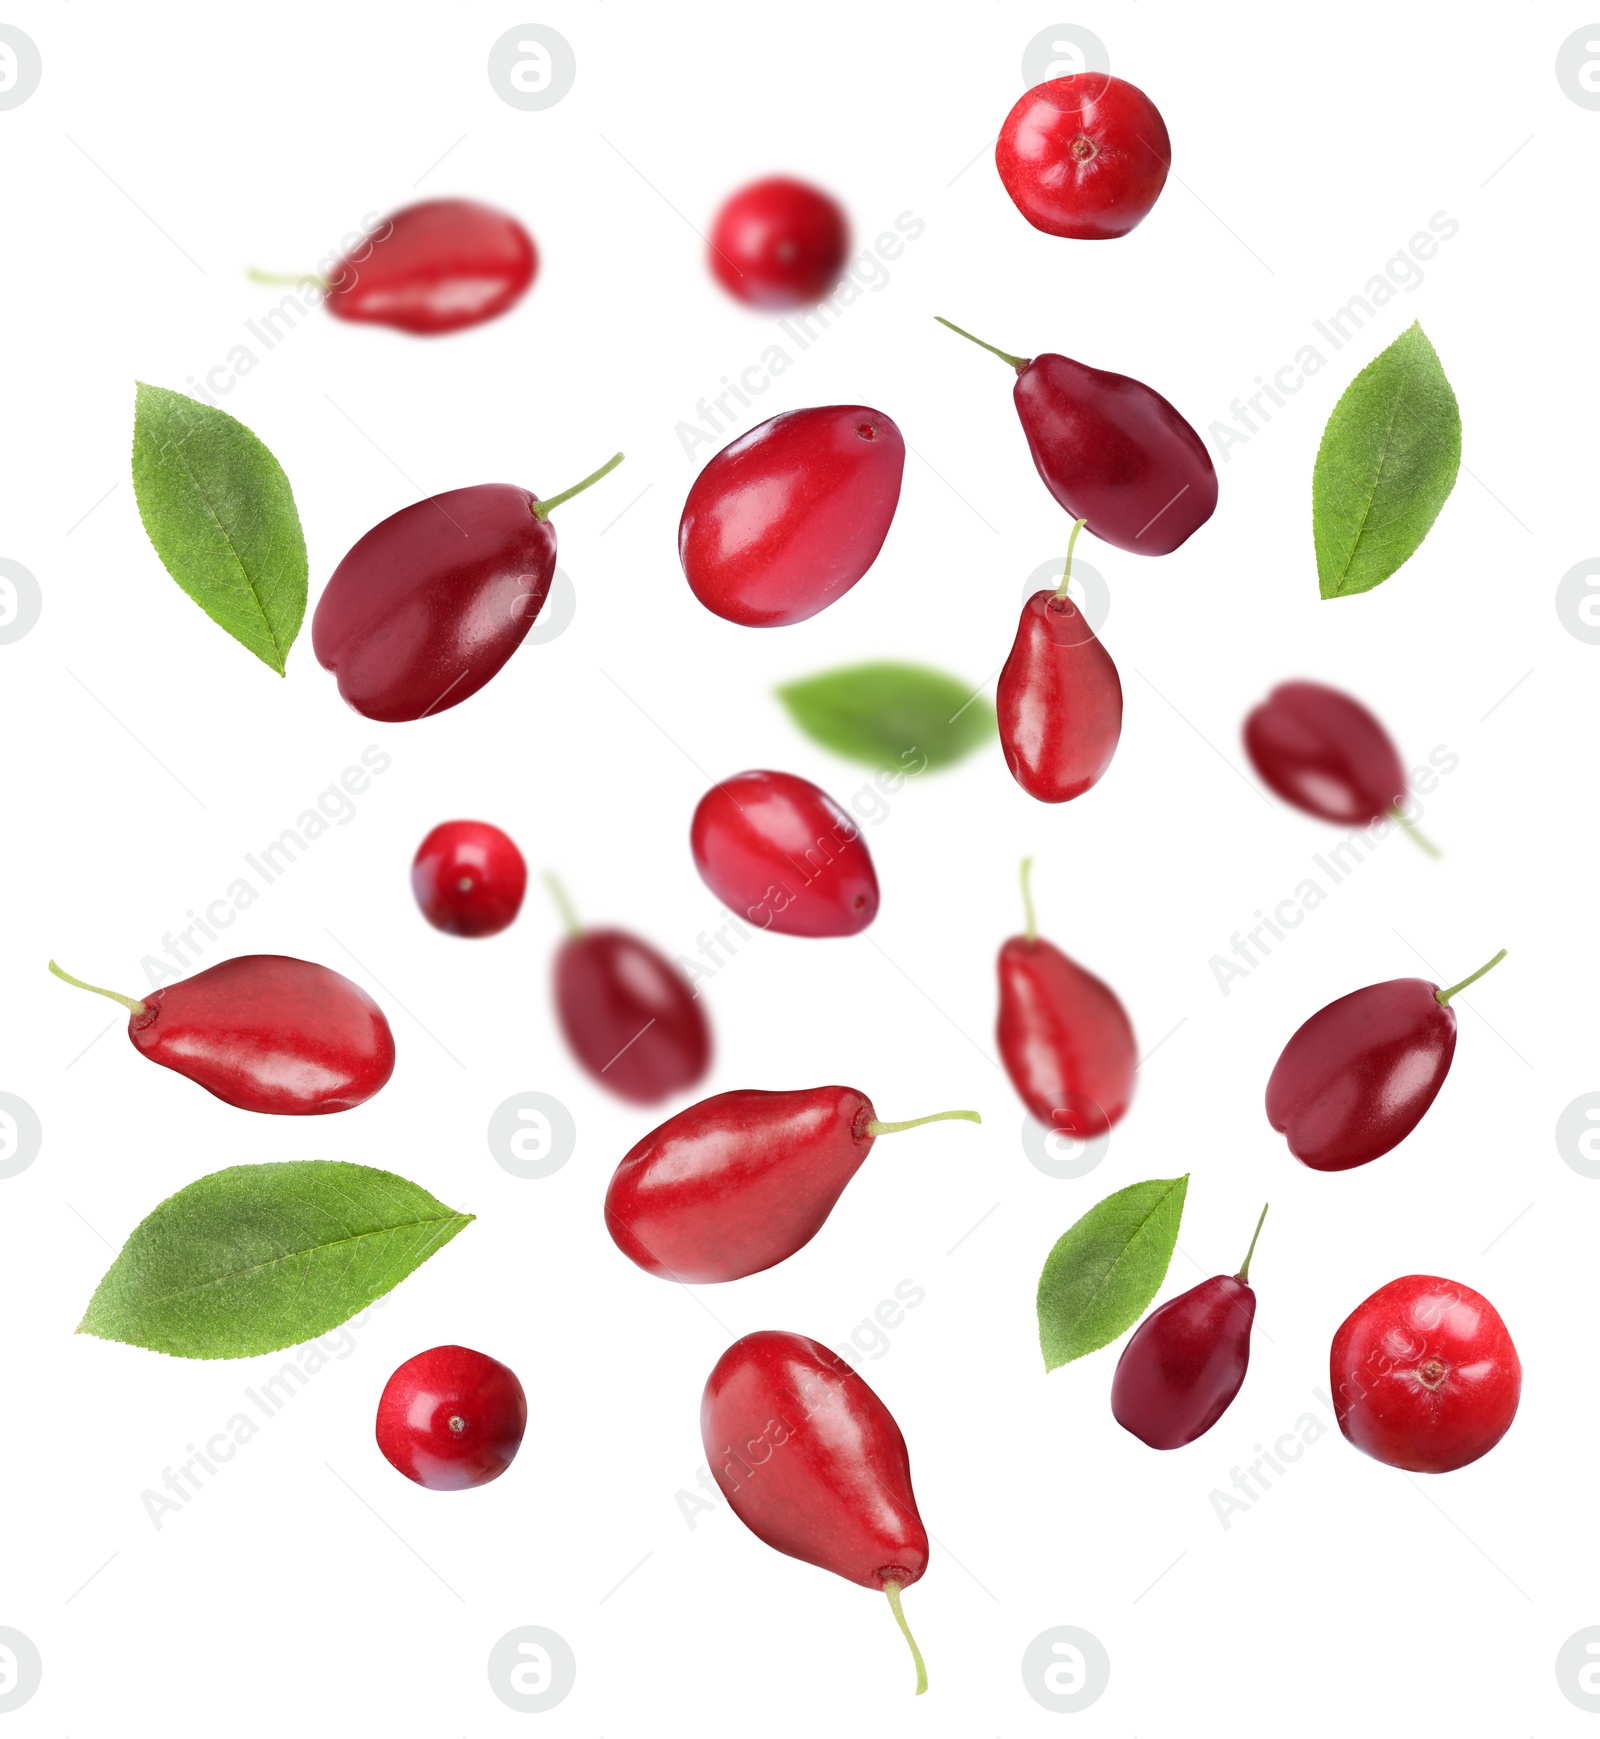 Image of Many fresh dogwood berries and leaves falling on white background